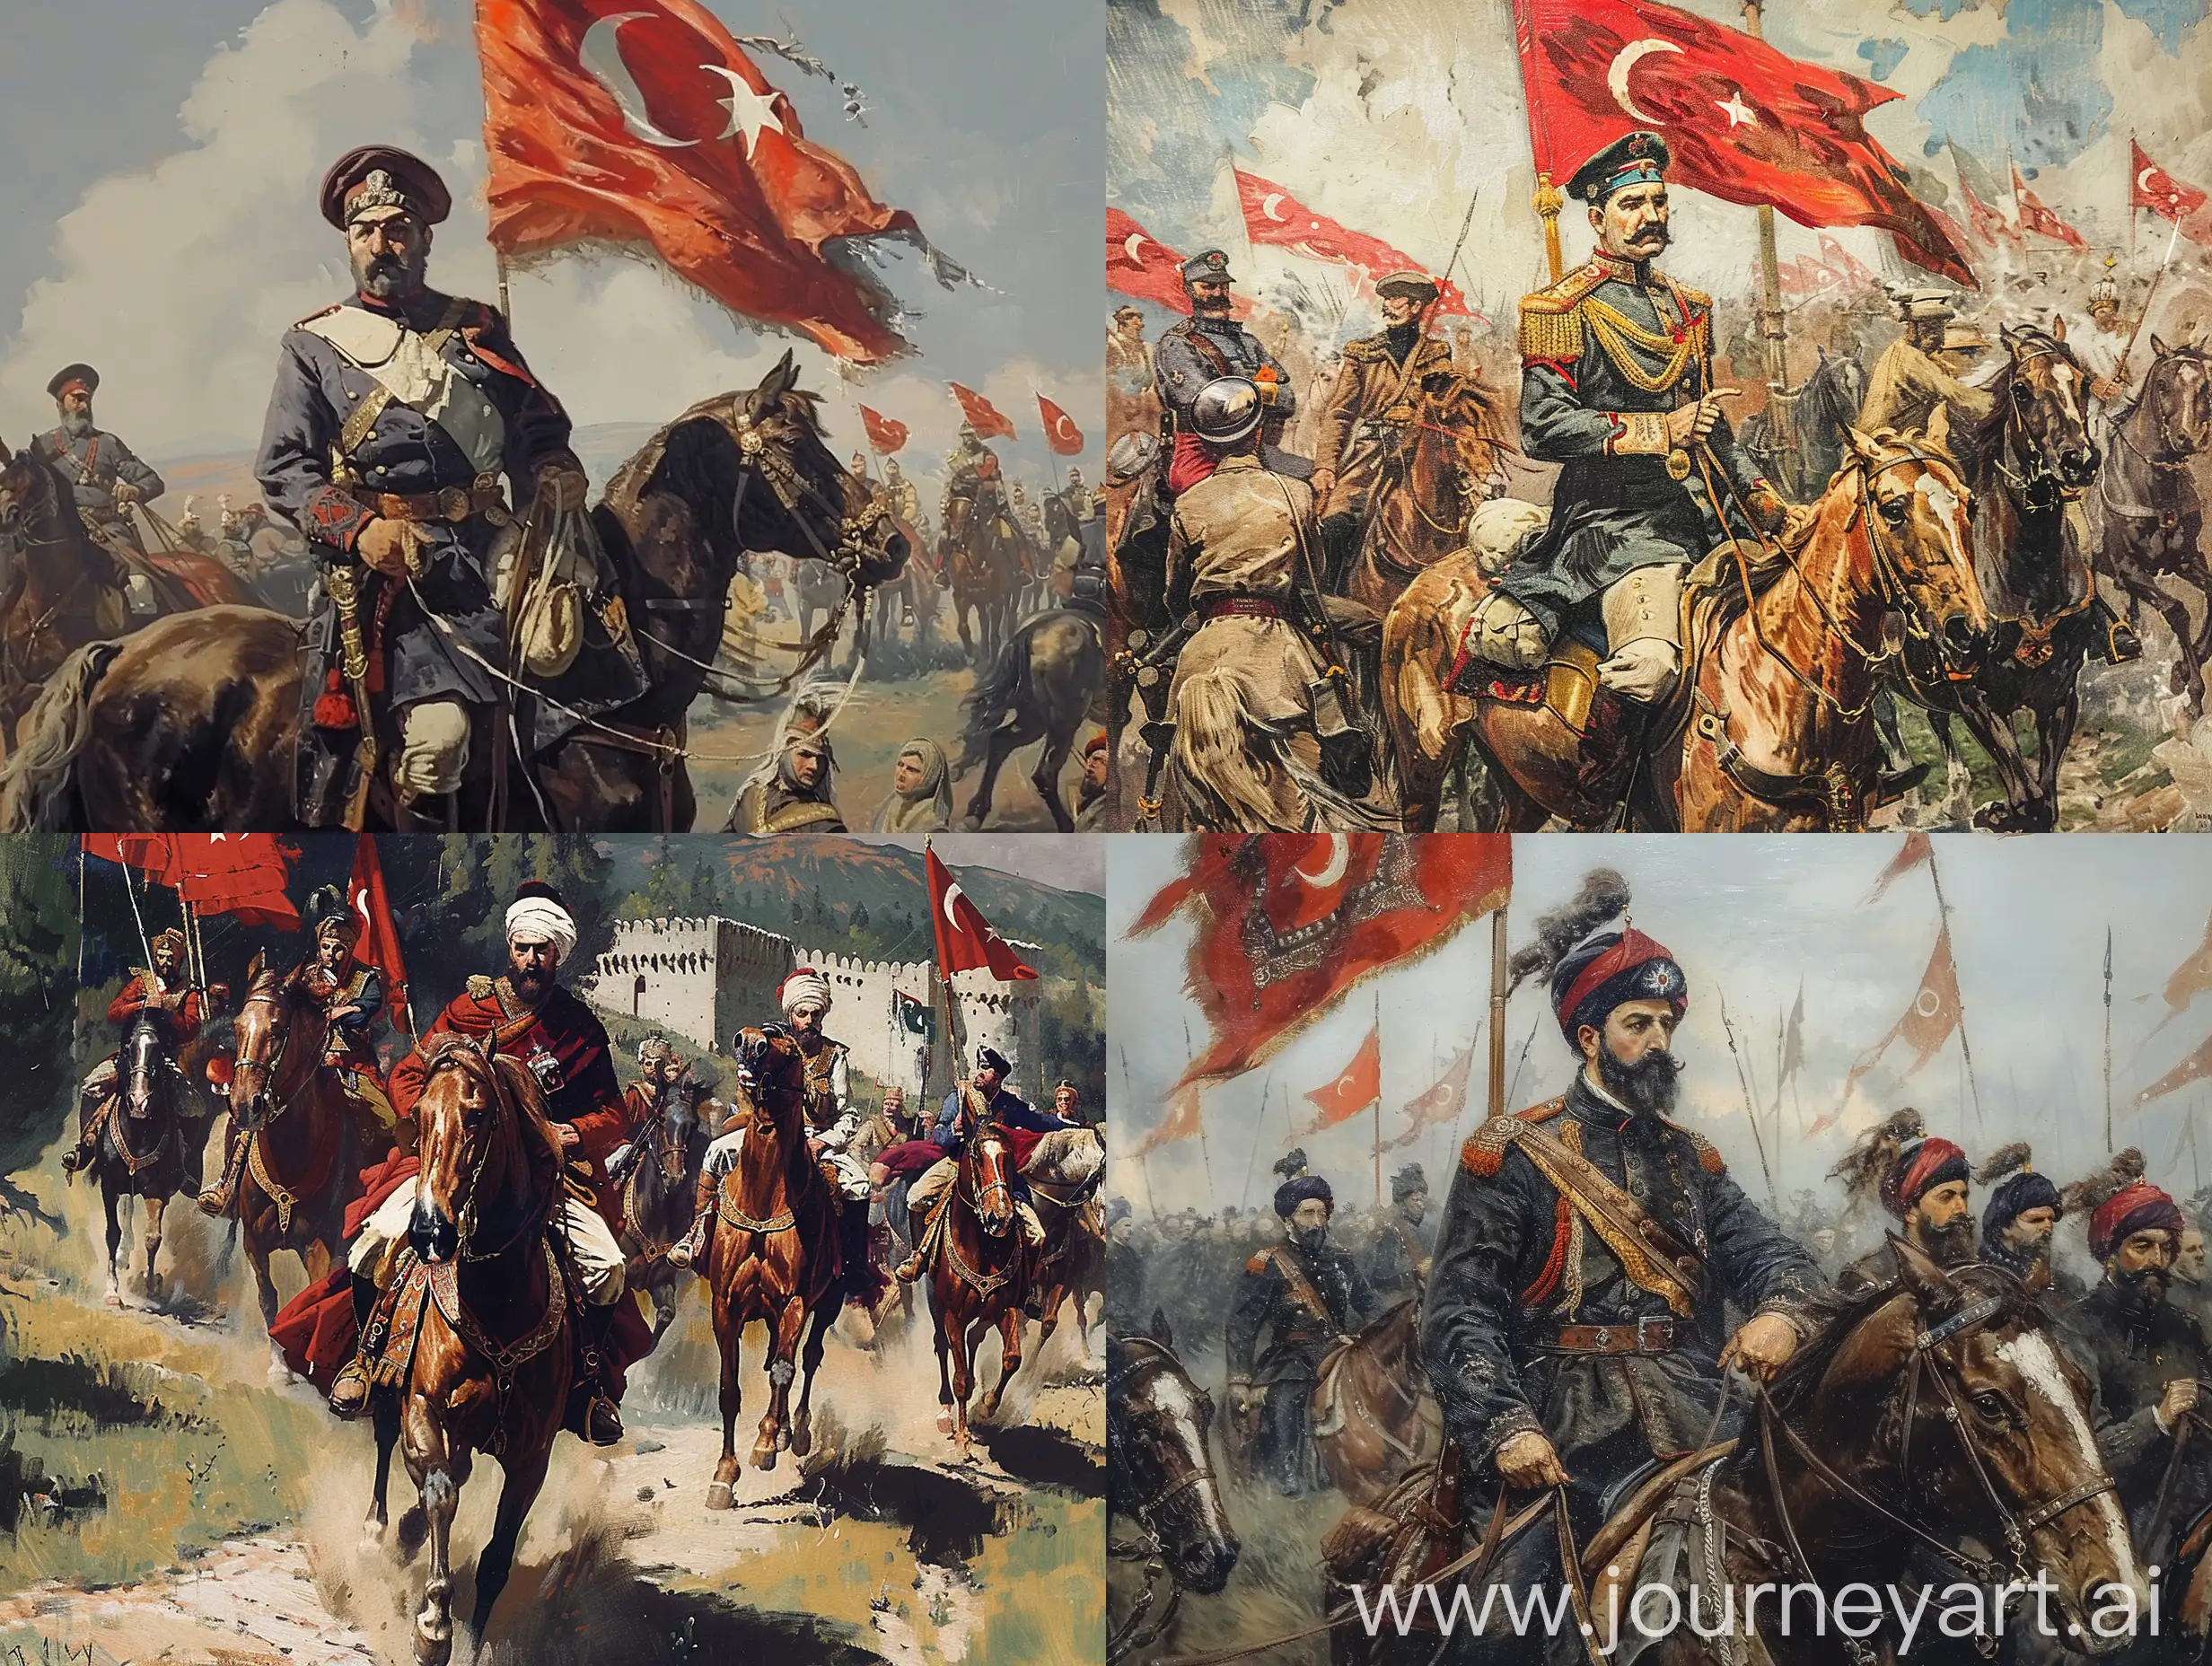 In 1919-1920, he founded Kuvâ-yi Seyyâre, the only organized military force in Anatolia. In collaboration with Ali Fuat Pasha in Ankara, he harassed the occupying Greek armies with his fast cavalry. He was effective in suppressing various rebellions against the authority of the Grand National Assembly of Turkey.